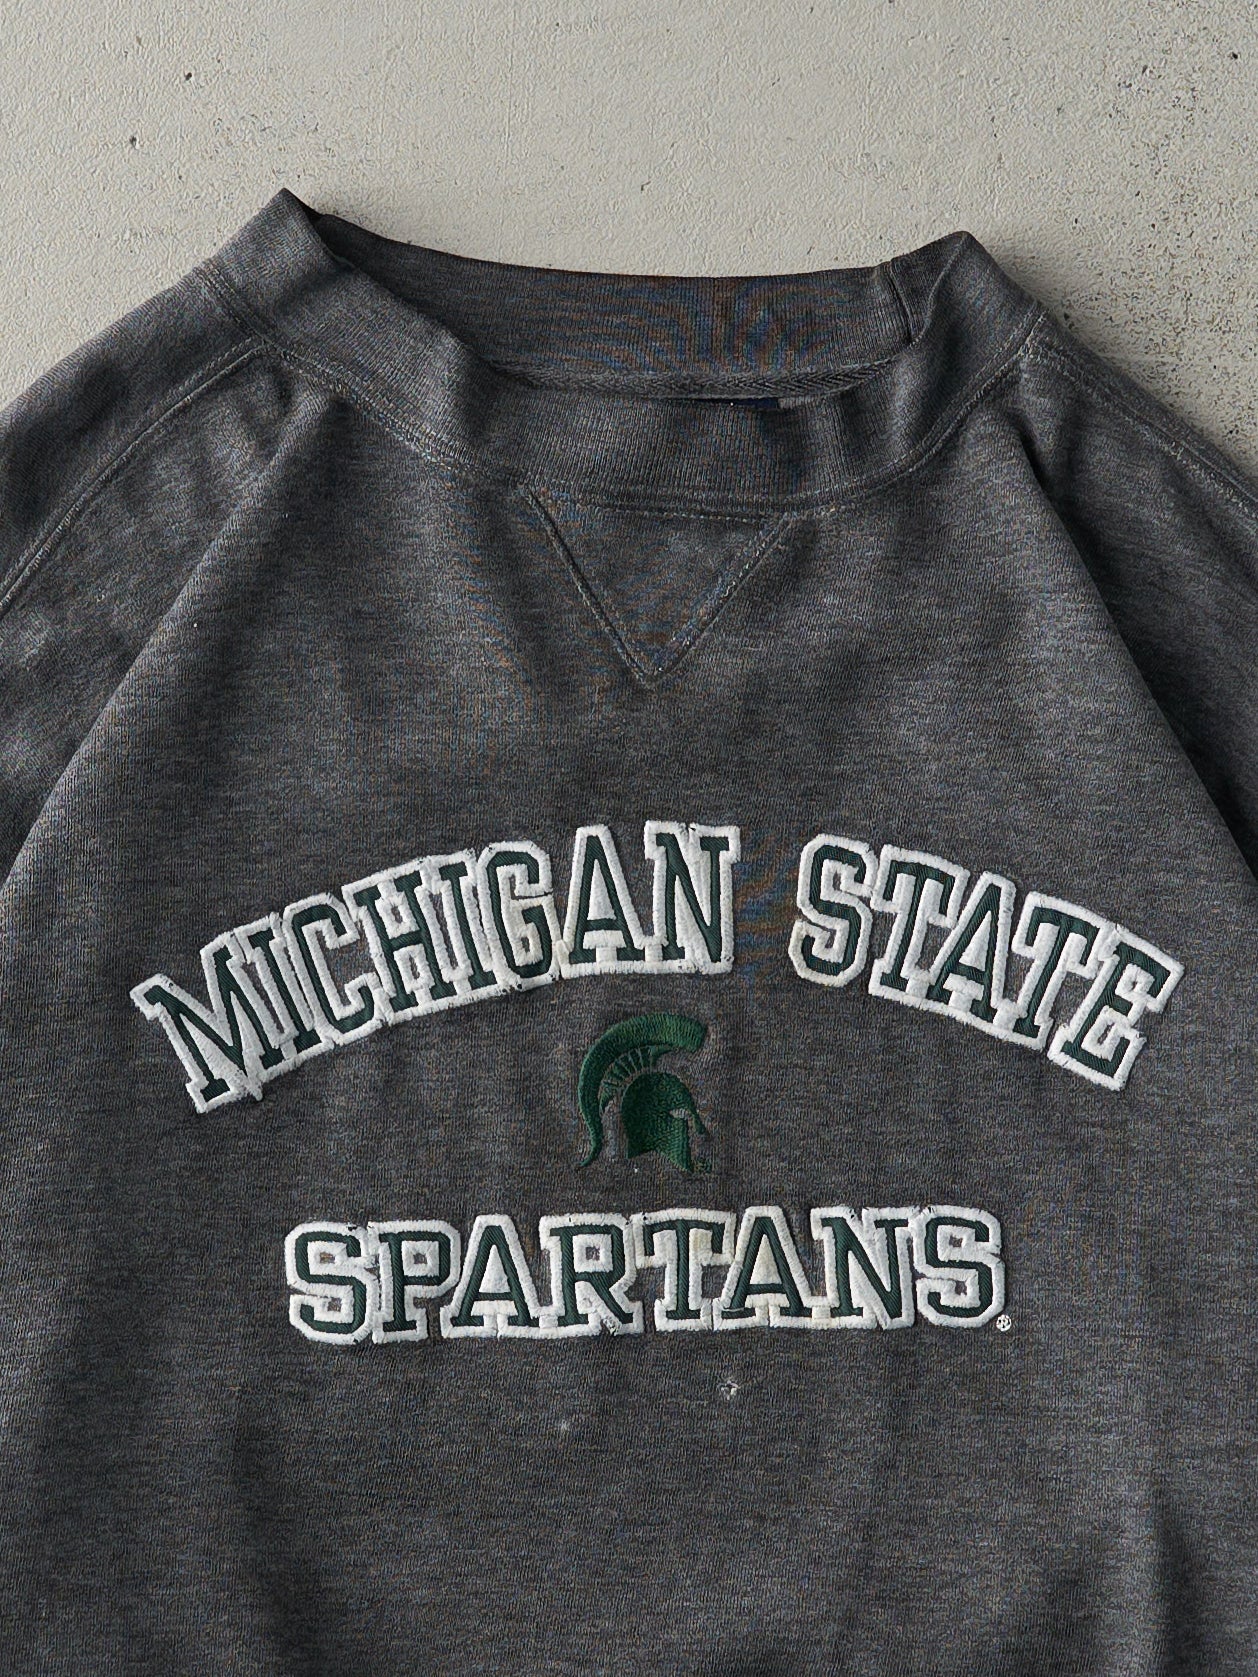 Vintage Y2K Charcoal Grey Michigan State Spartans Embroidered Crewneck (L)